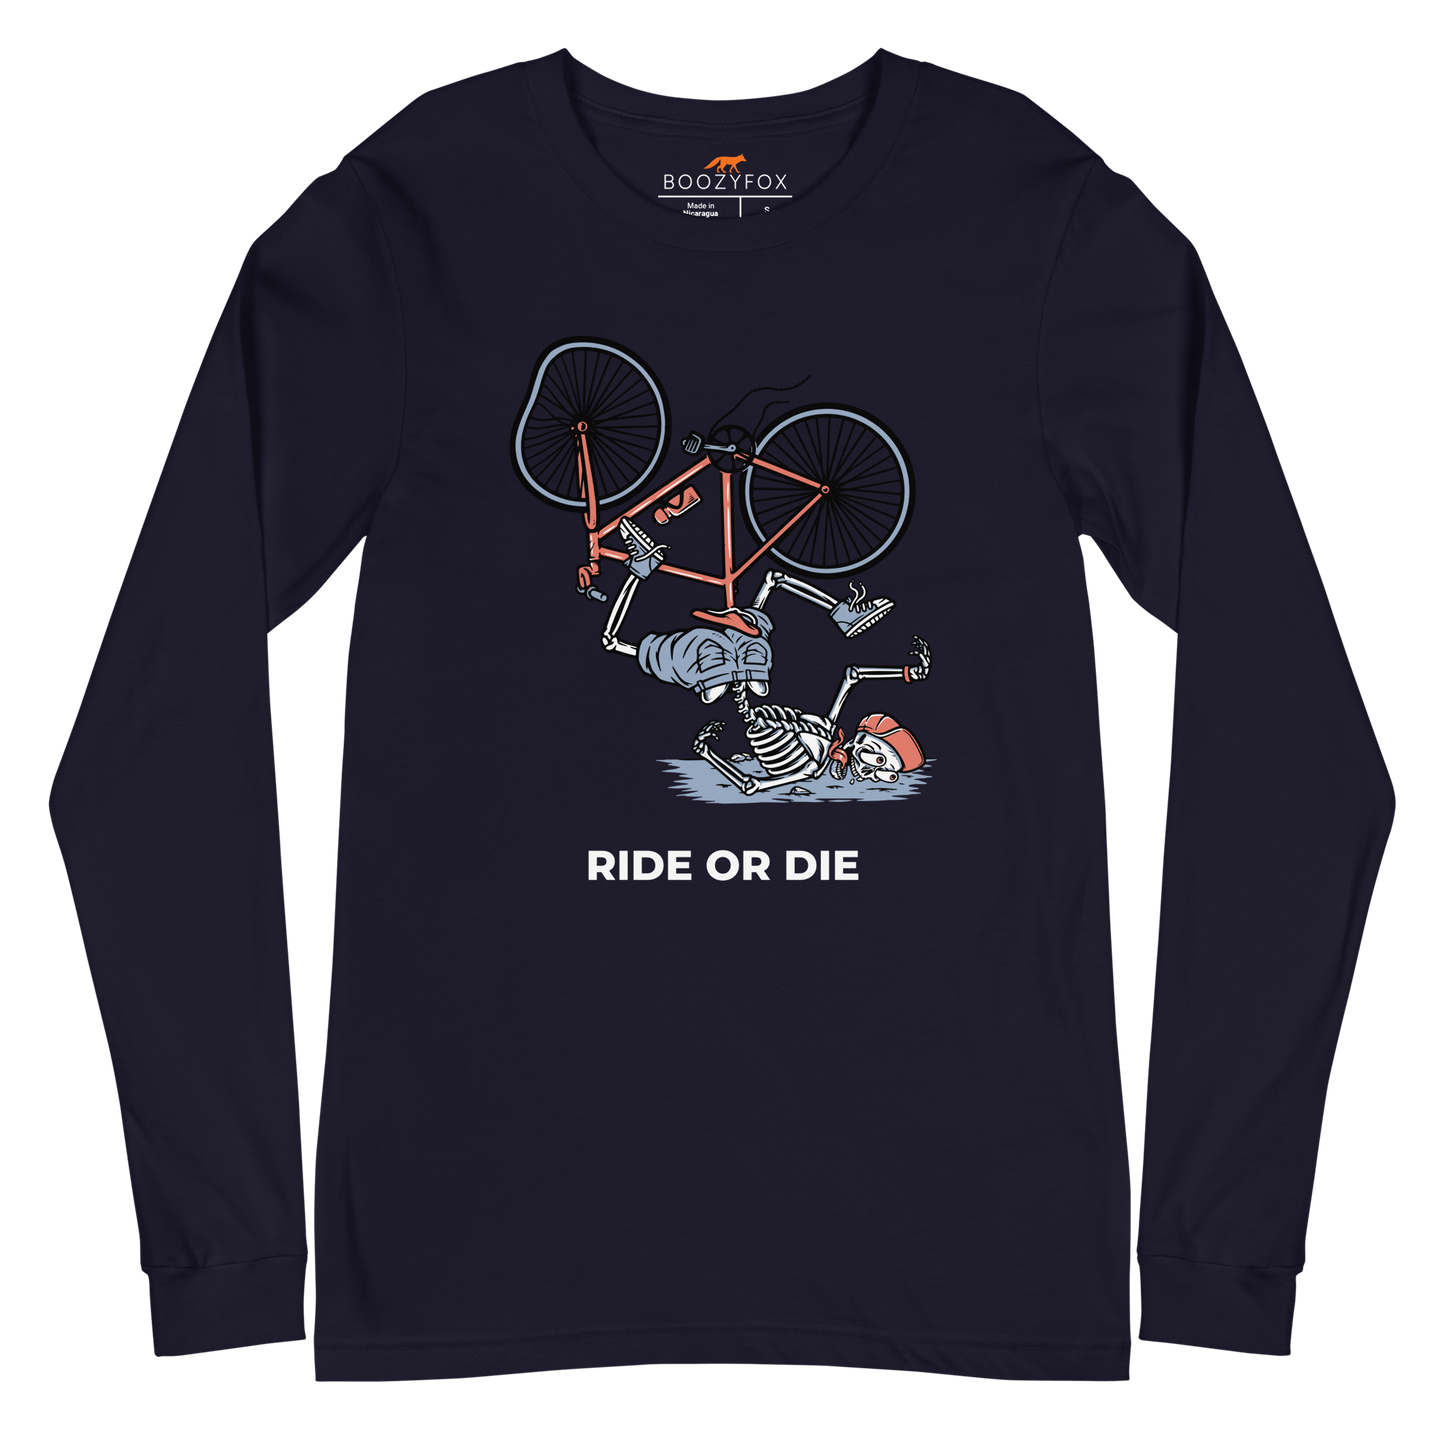 Navy Ride or Die Long Sleeve Tee featuring a bold Skeleton Falling While Riding a Bicycle graphic on the chest - Funny Skeleton Long Sleeve Graphic Tees - Boozy Fox